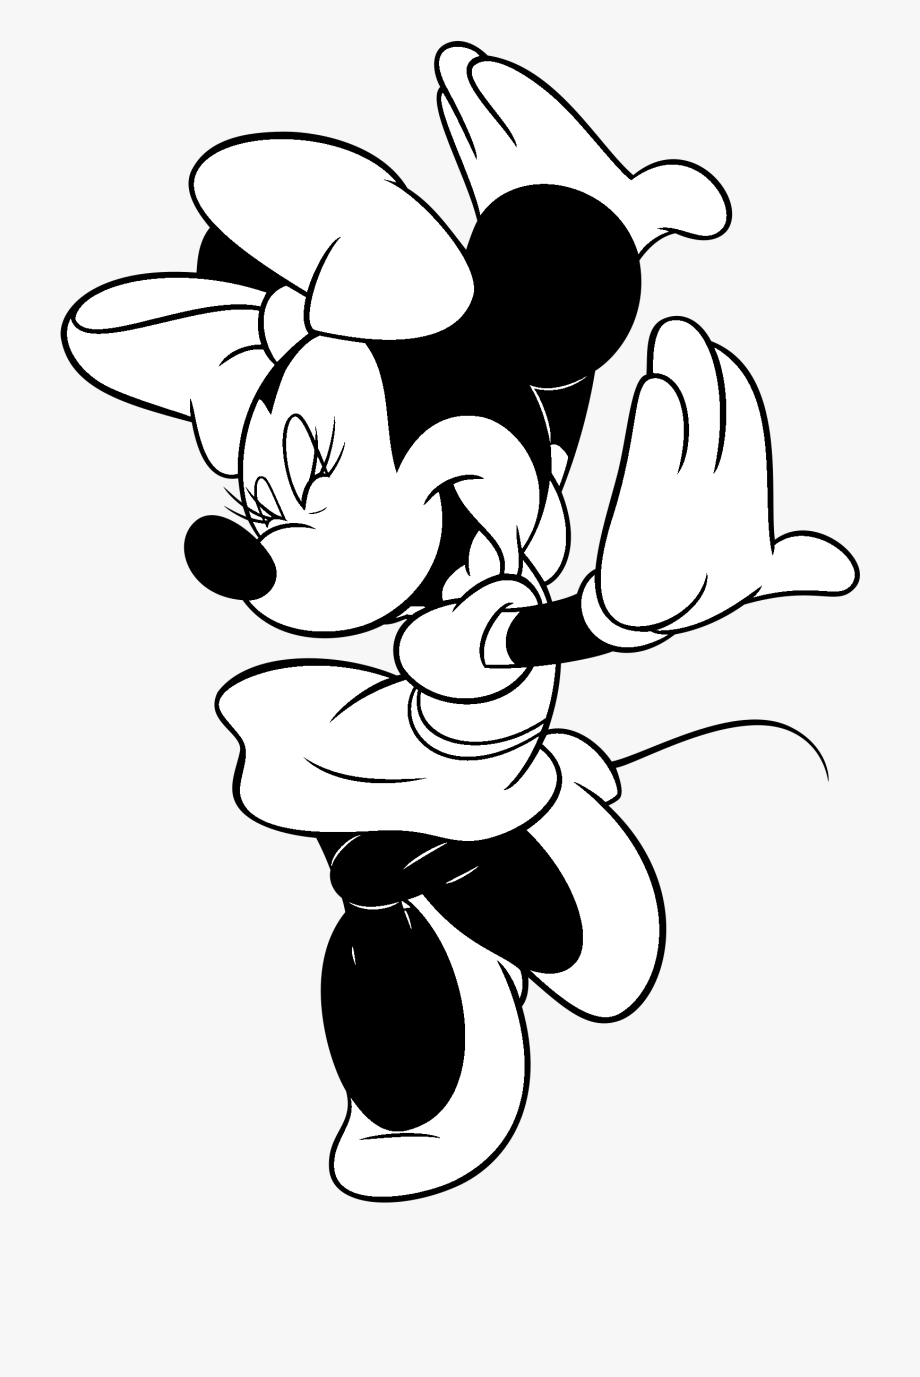 Minnie Mouse Black And White Png , Transparent Cartoon, Free.